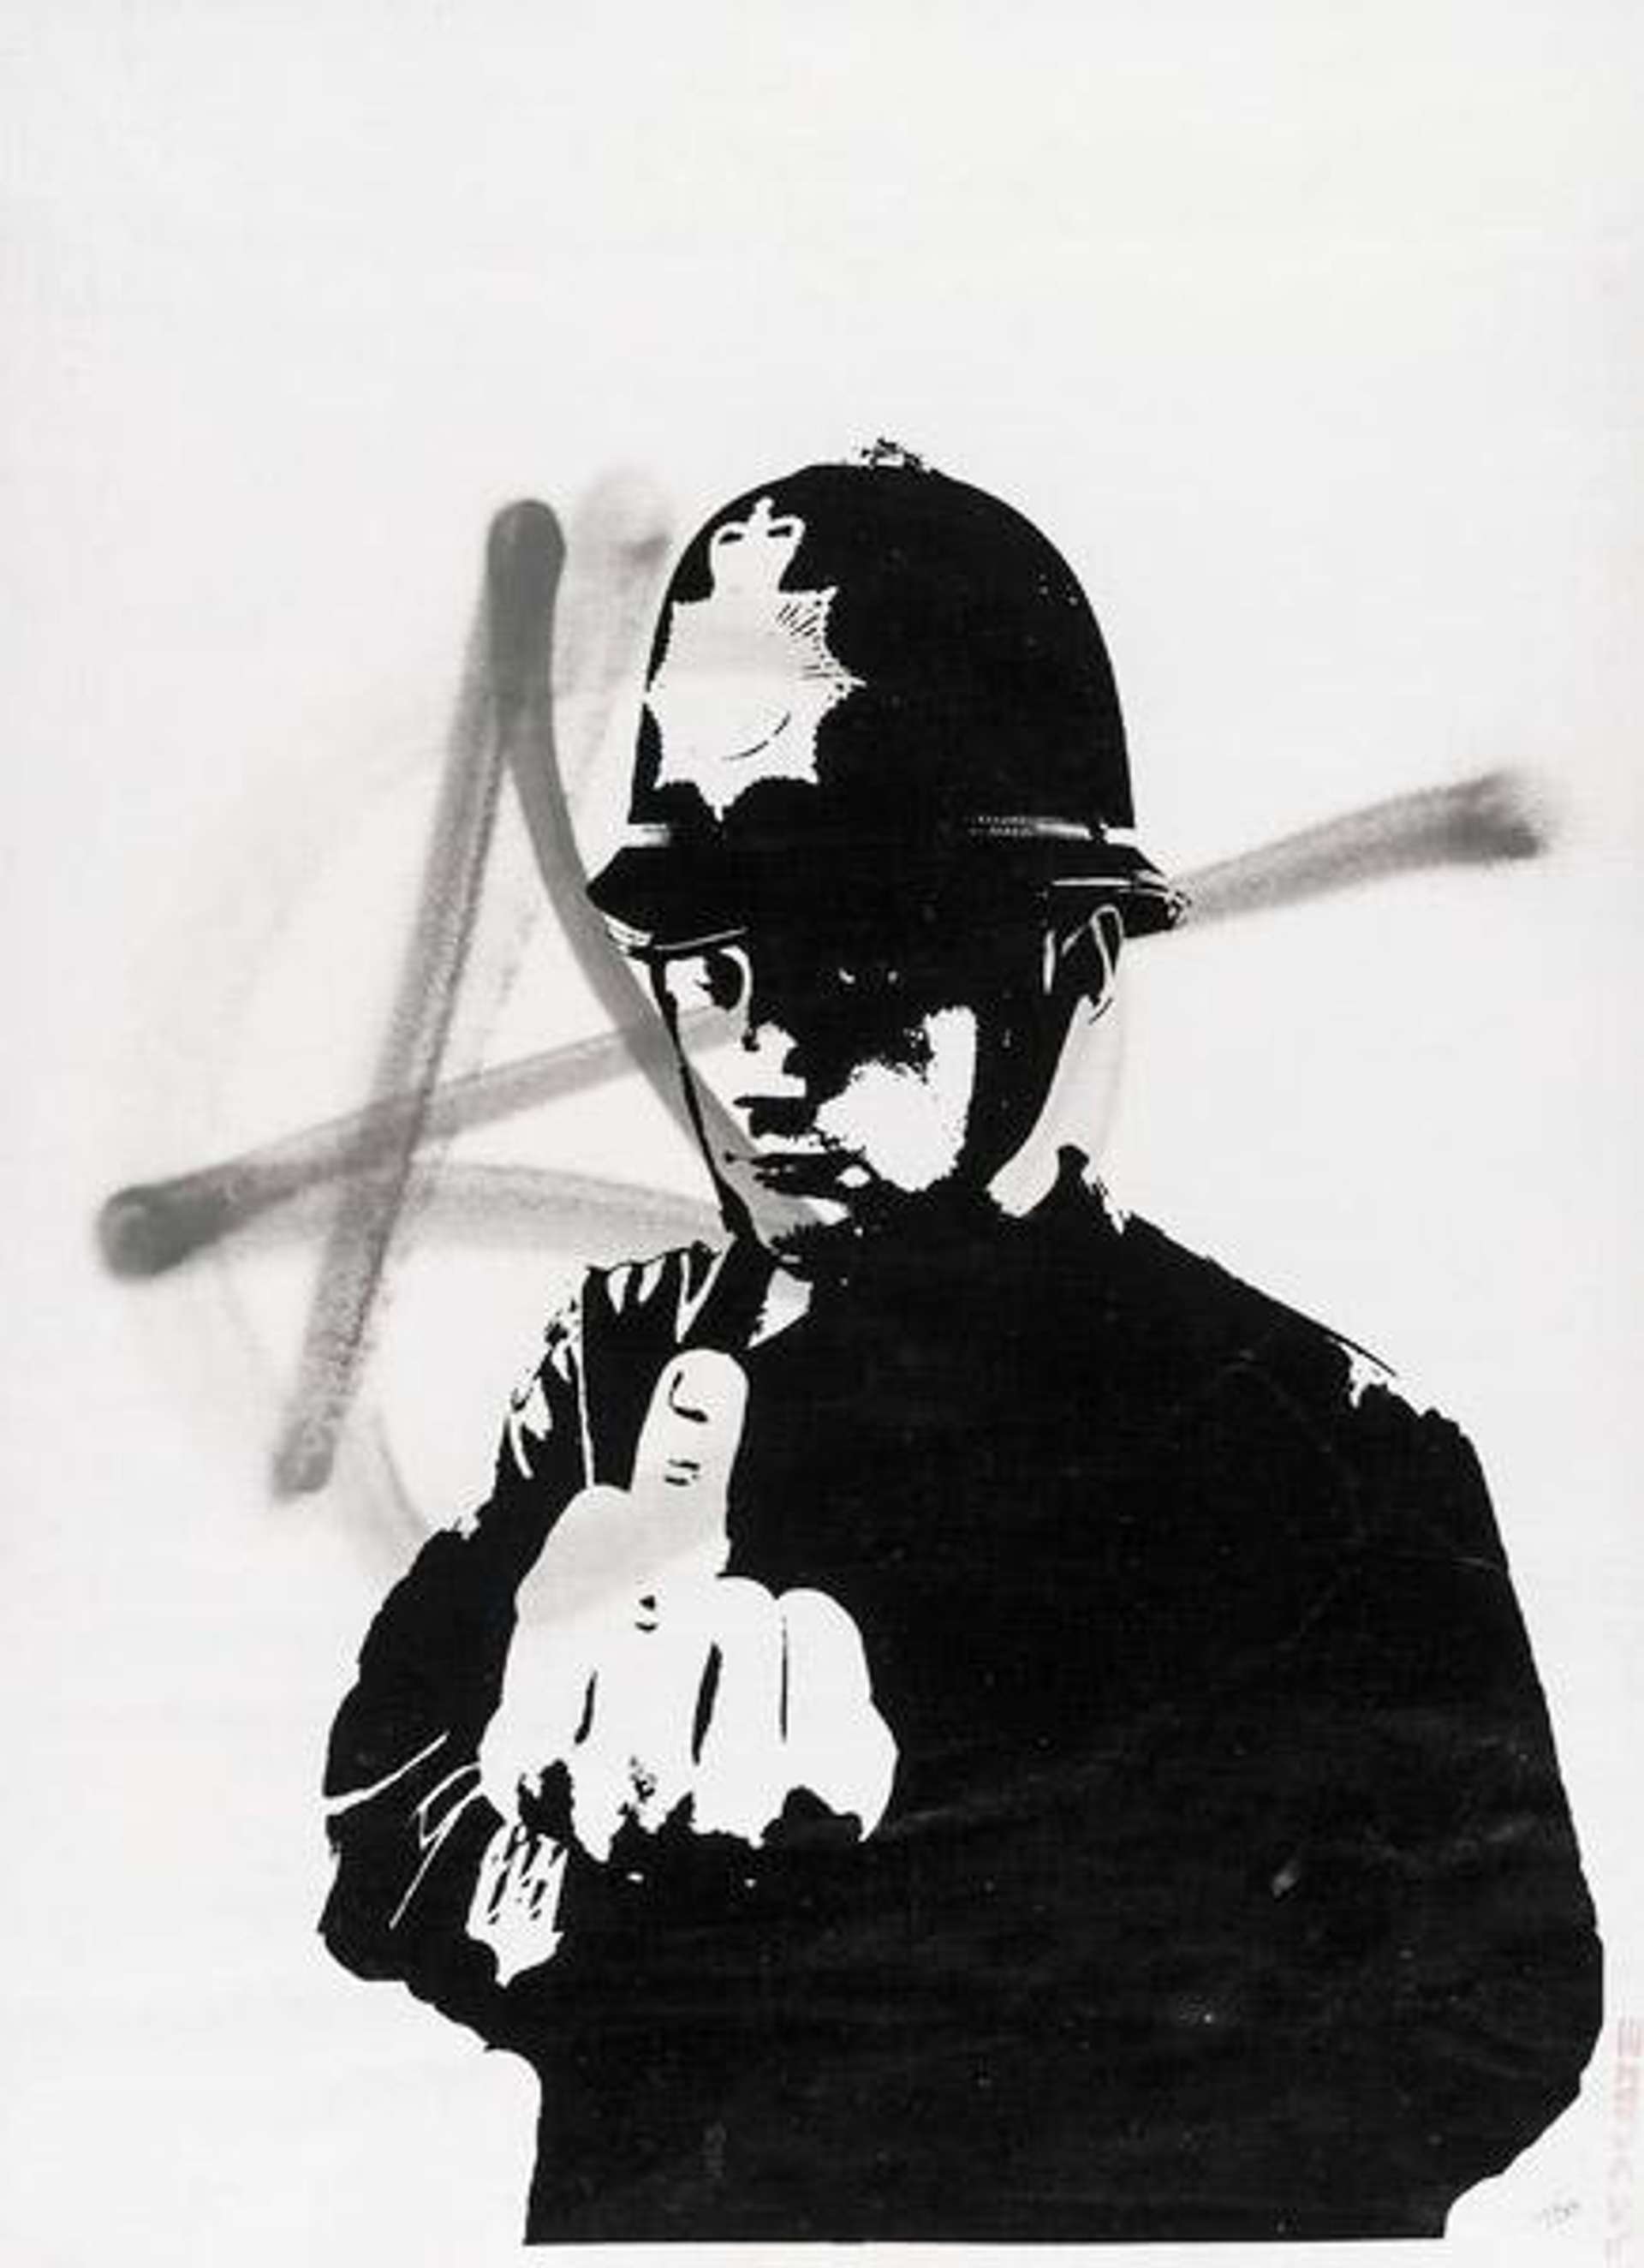 A screenprint by Banksy depicting a uniformed police officer flipping the bird at the viewer, with a spraypainted anarchy symbol in the background.